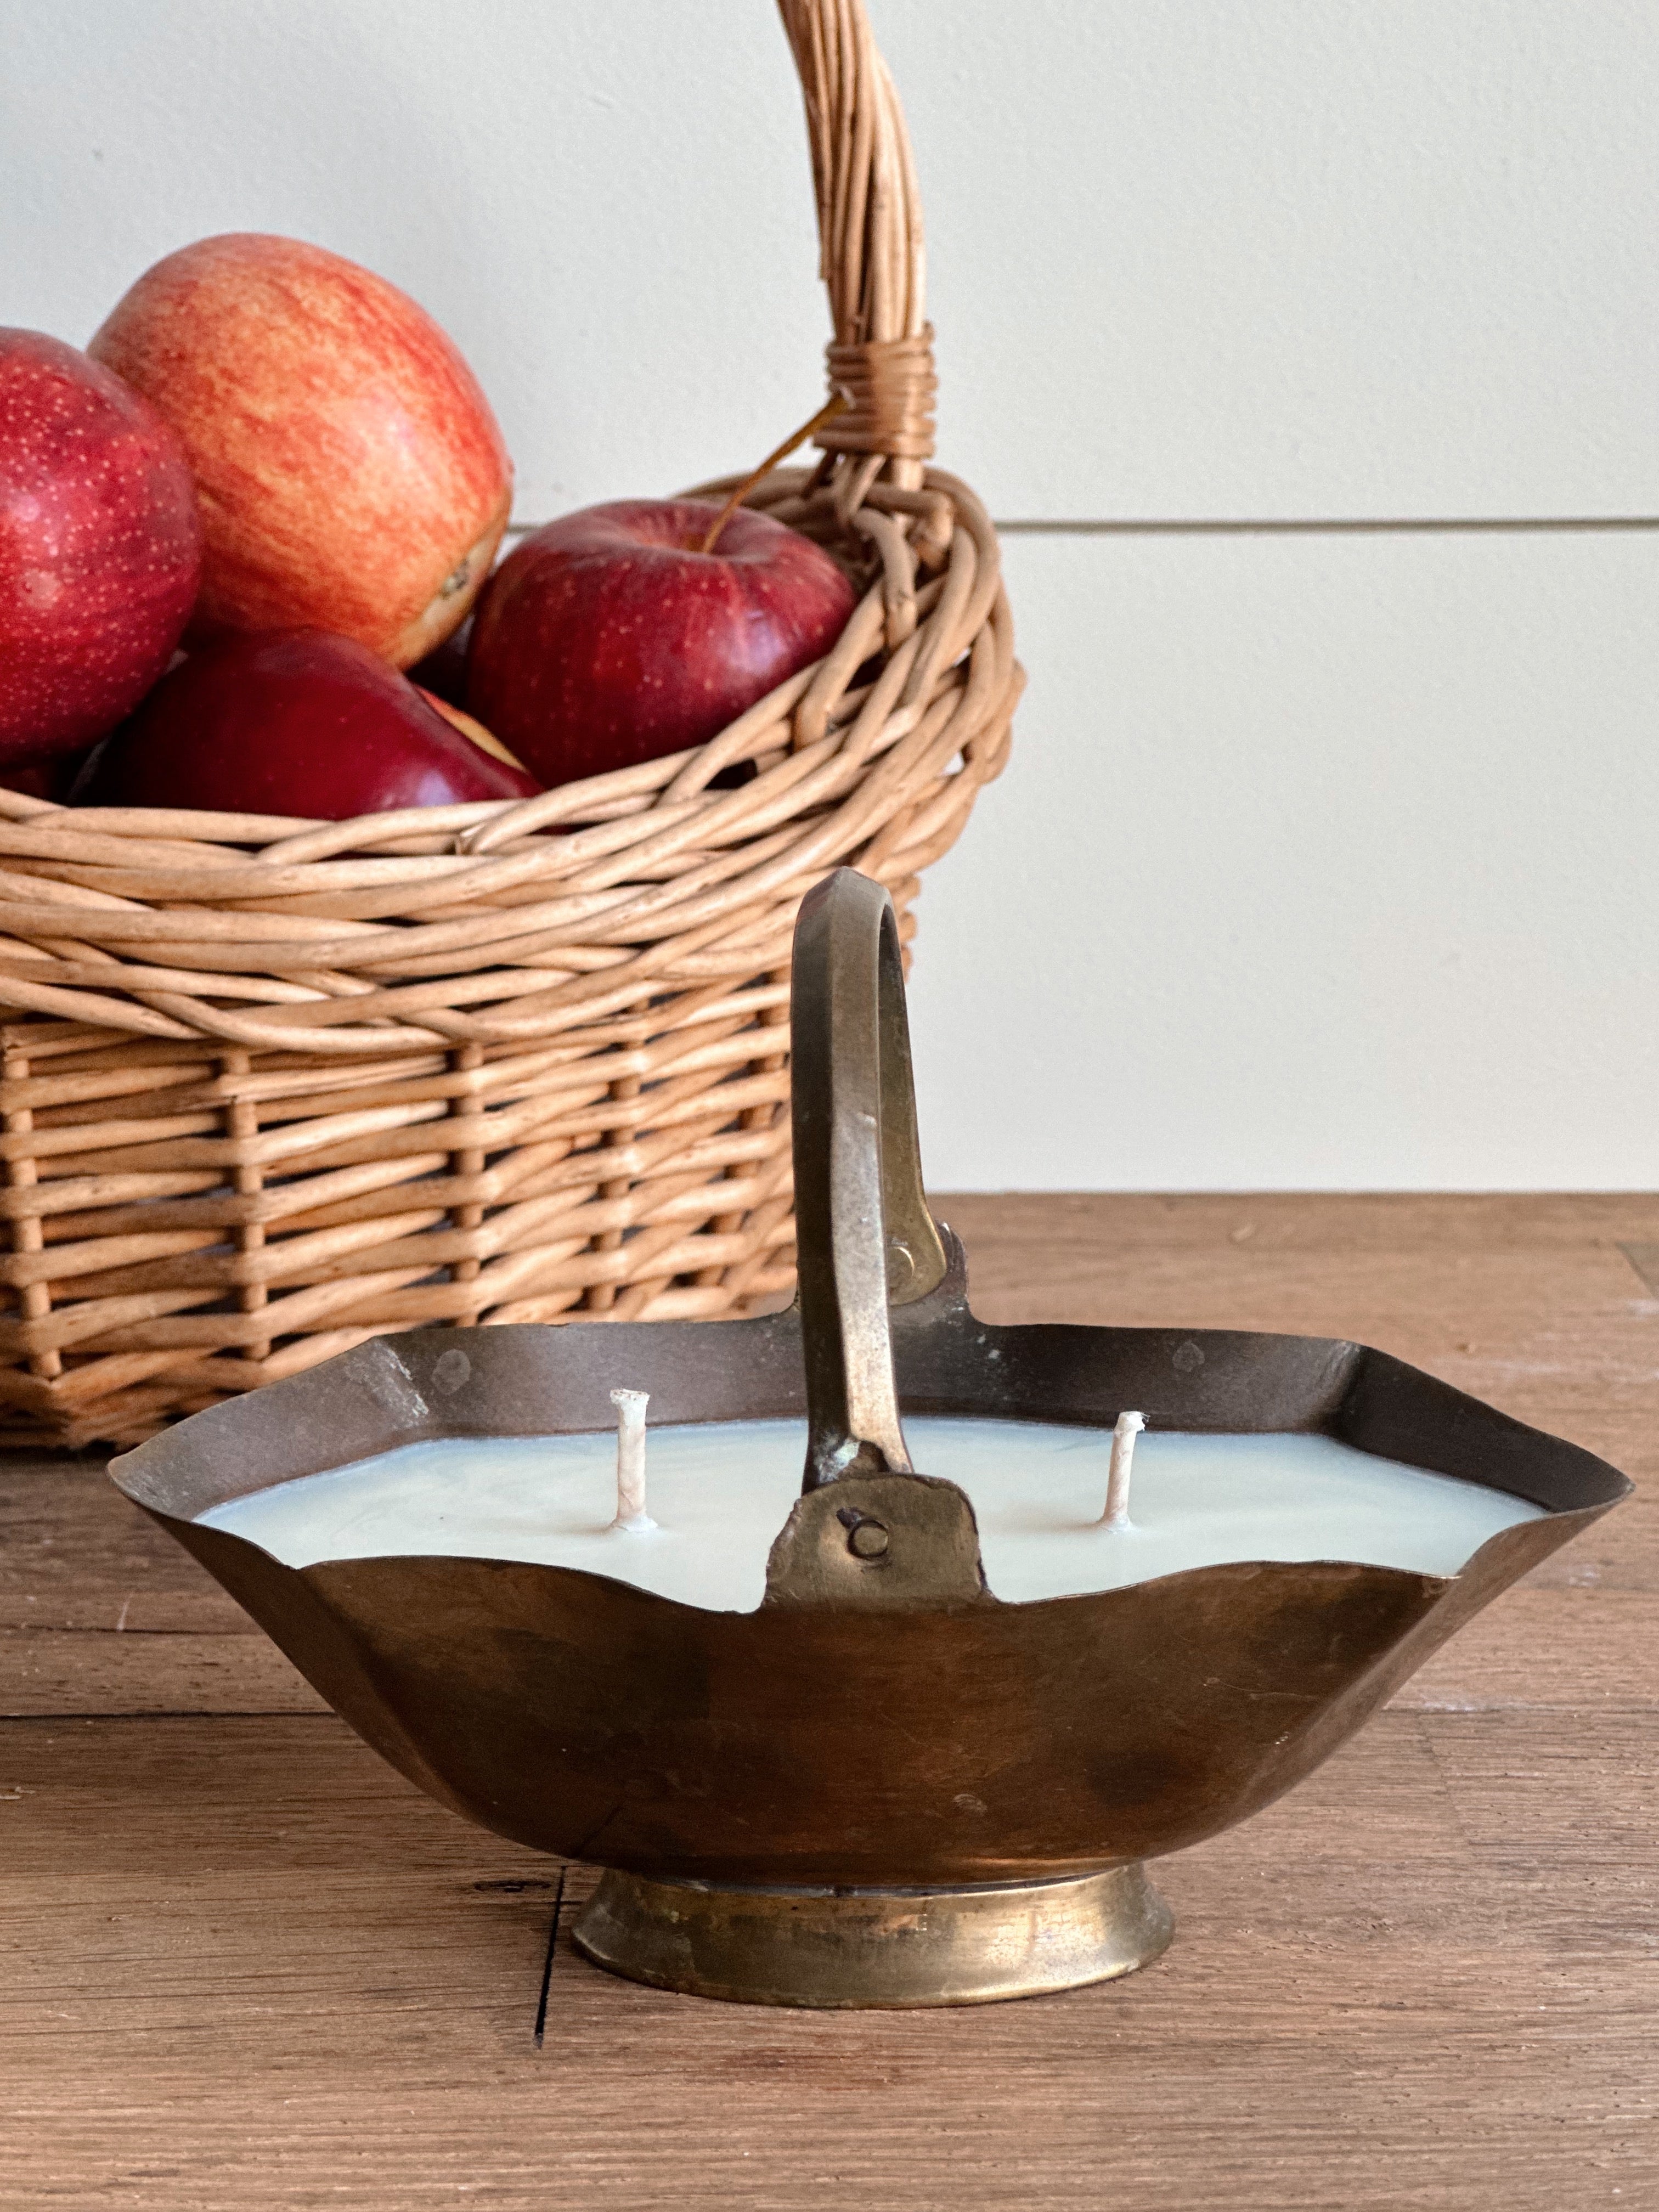 Hand Poured Apple Orchard Candle in a Vintage Brass Basket